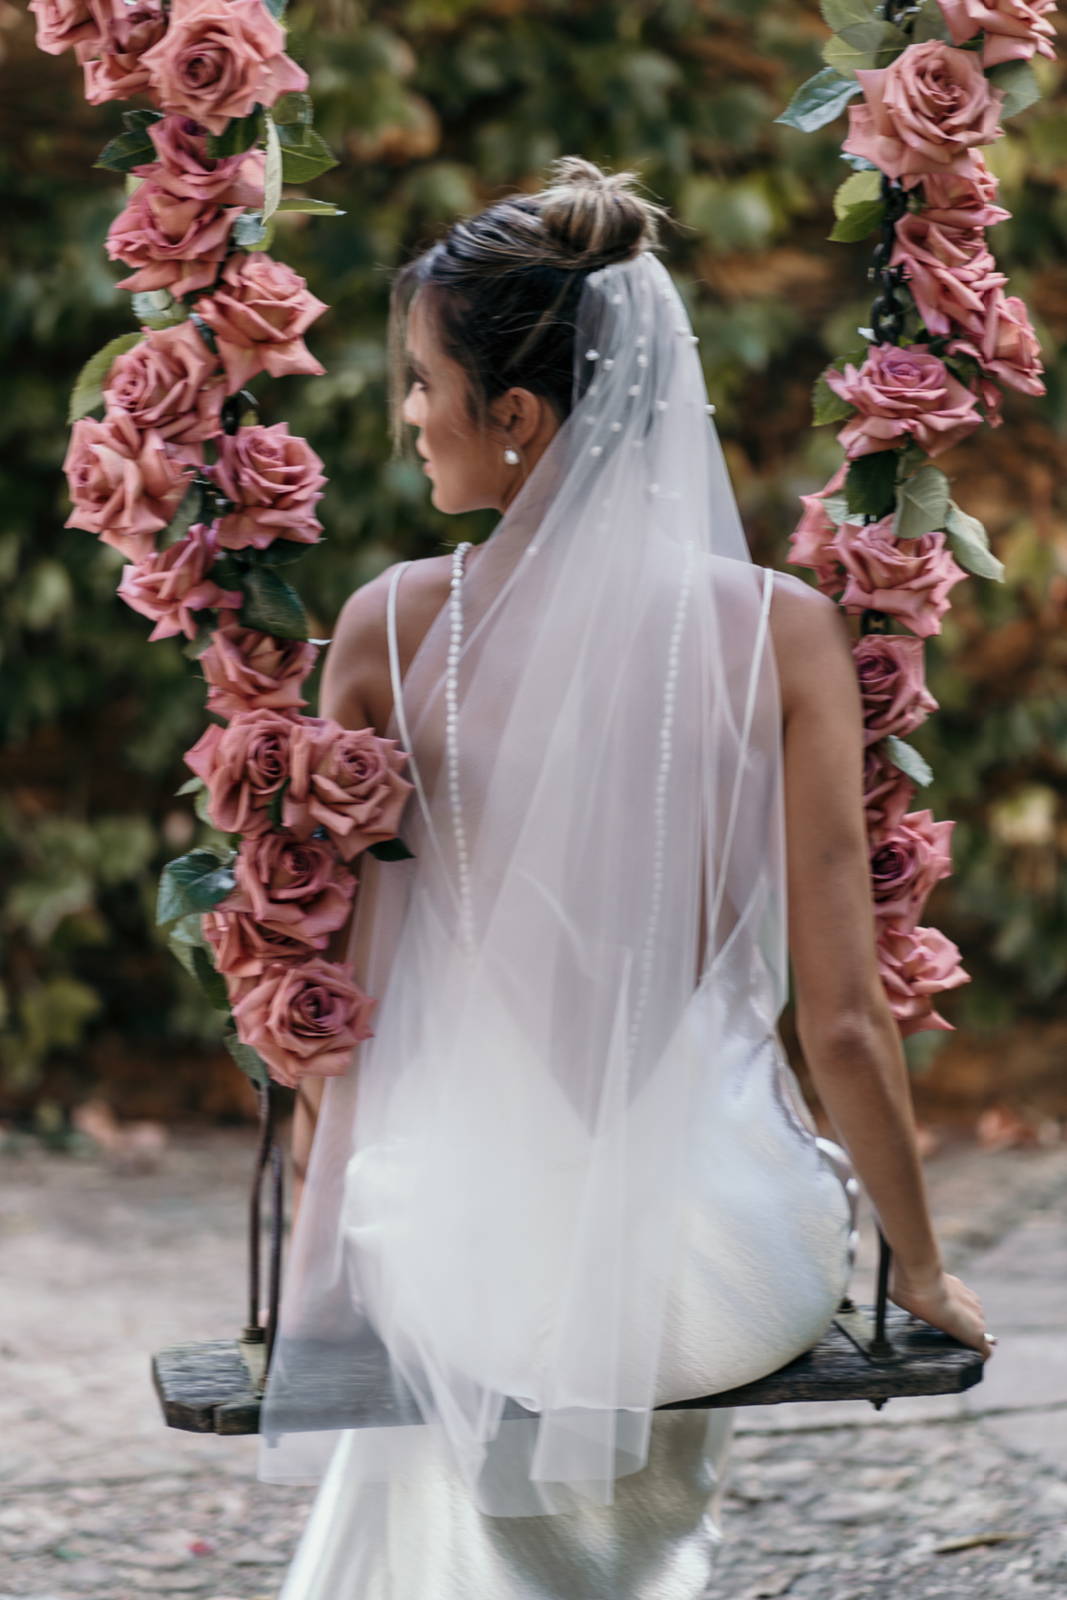  Bride on a swing adorned with pink flowers